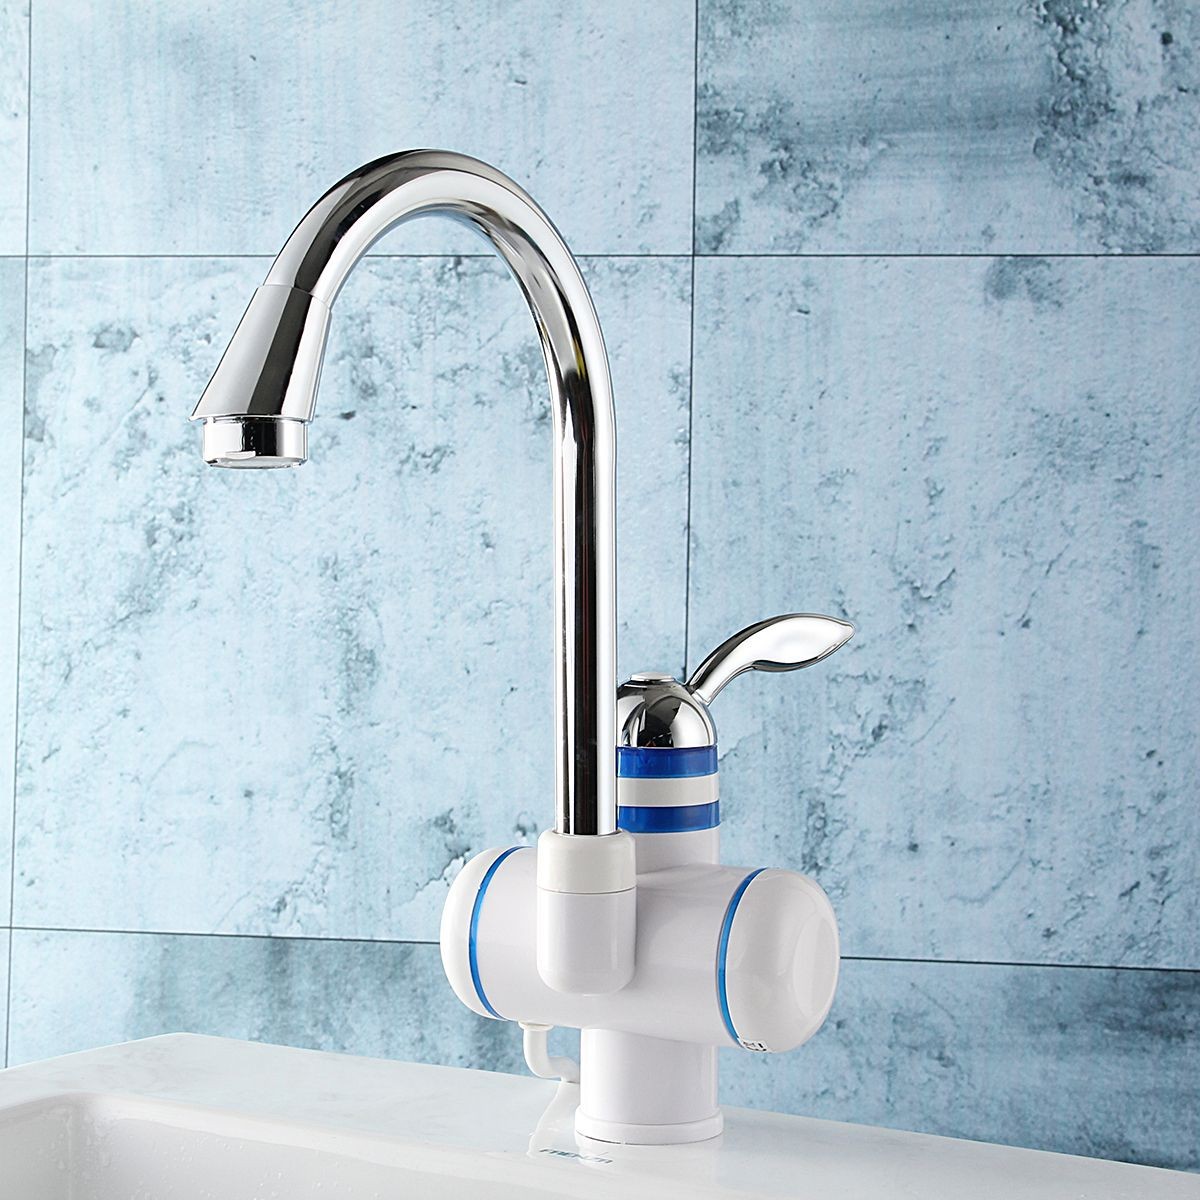 Faucet Hot Water Heater 220v 3000w Instant Electric Heating Tap Tankless Electric Water